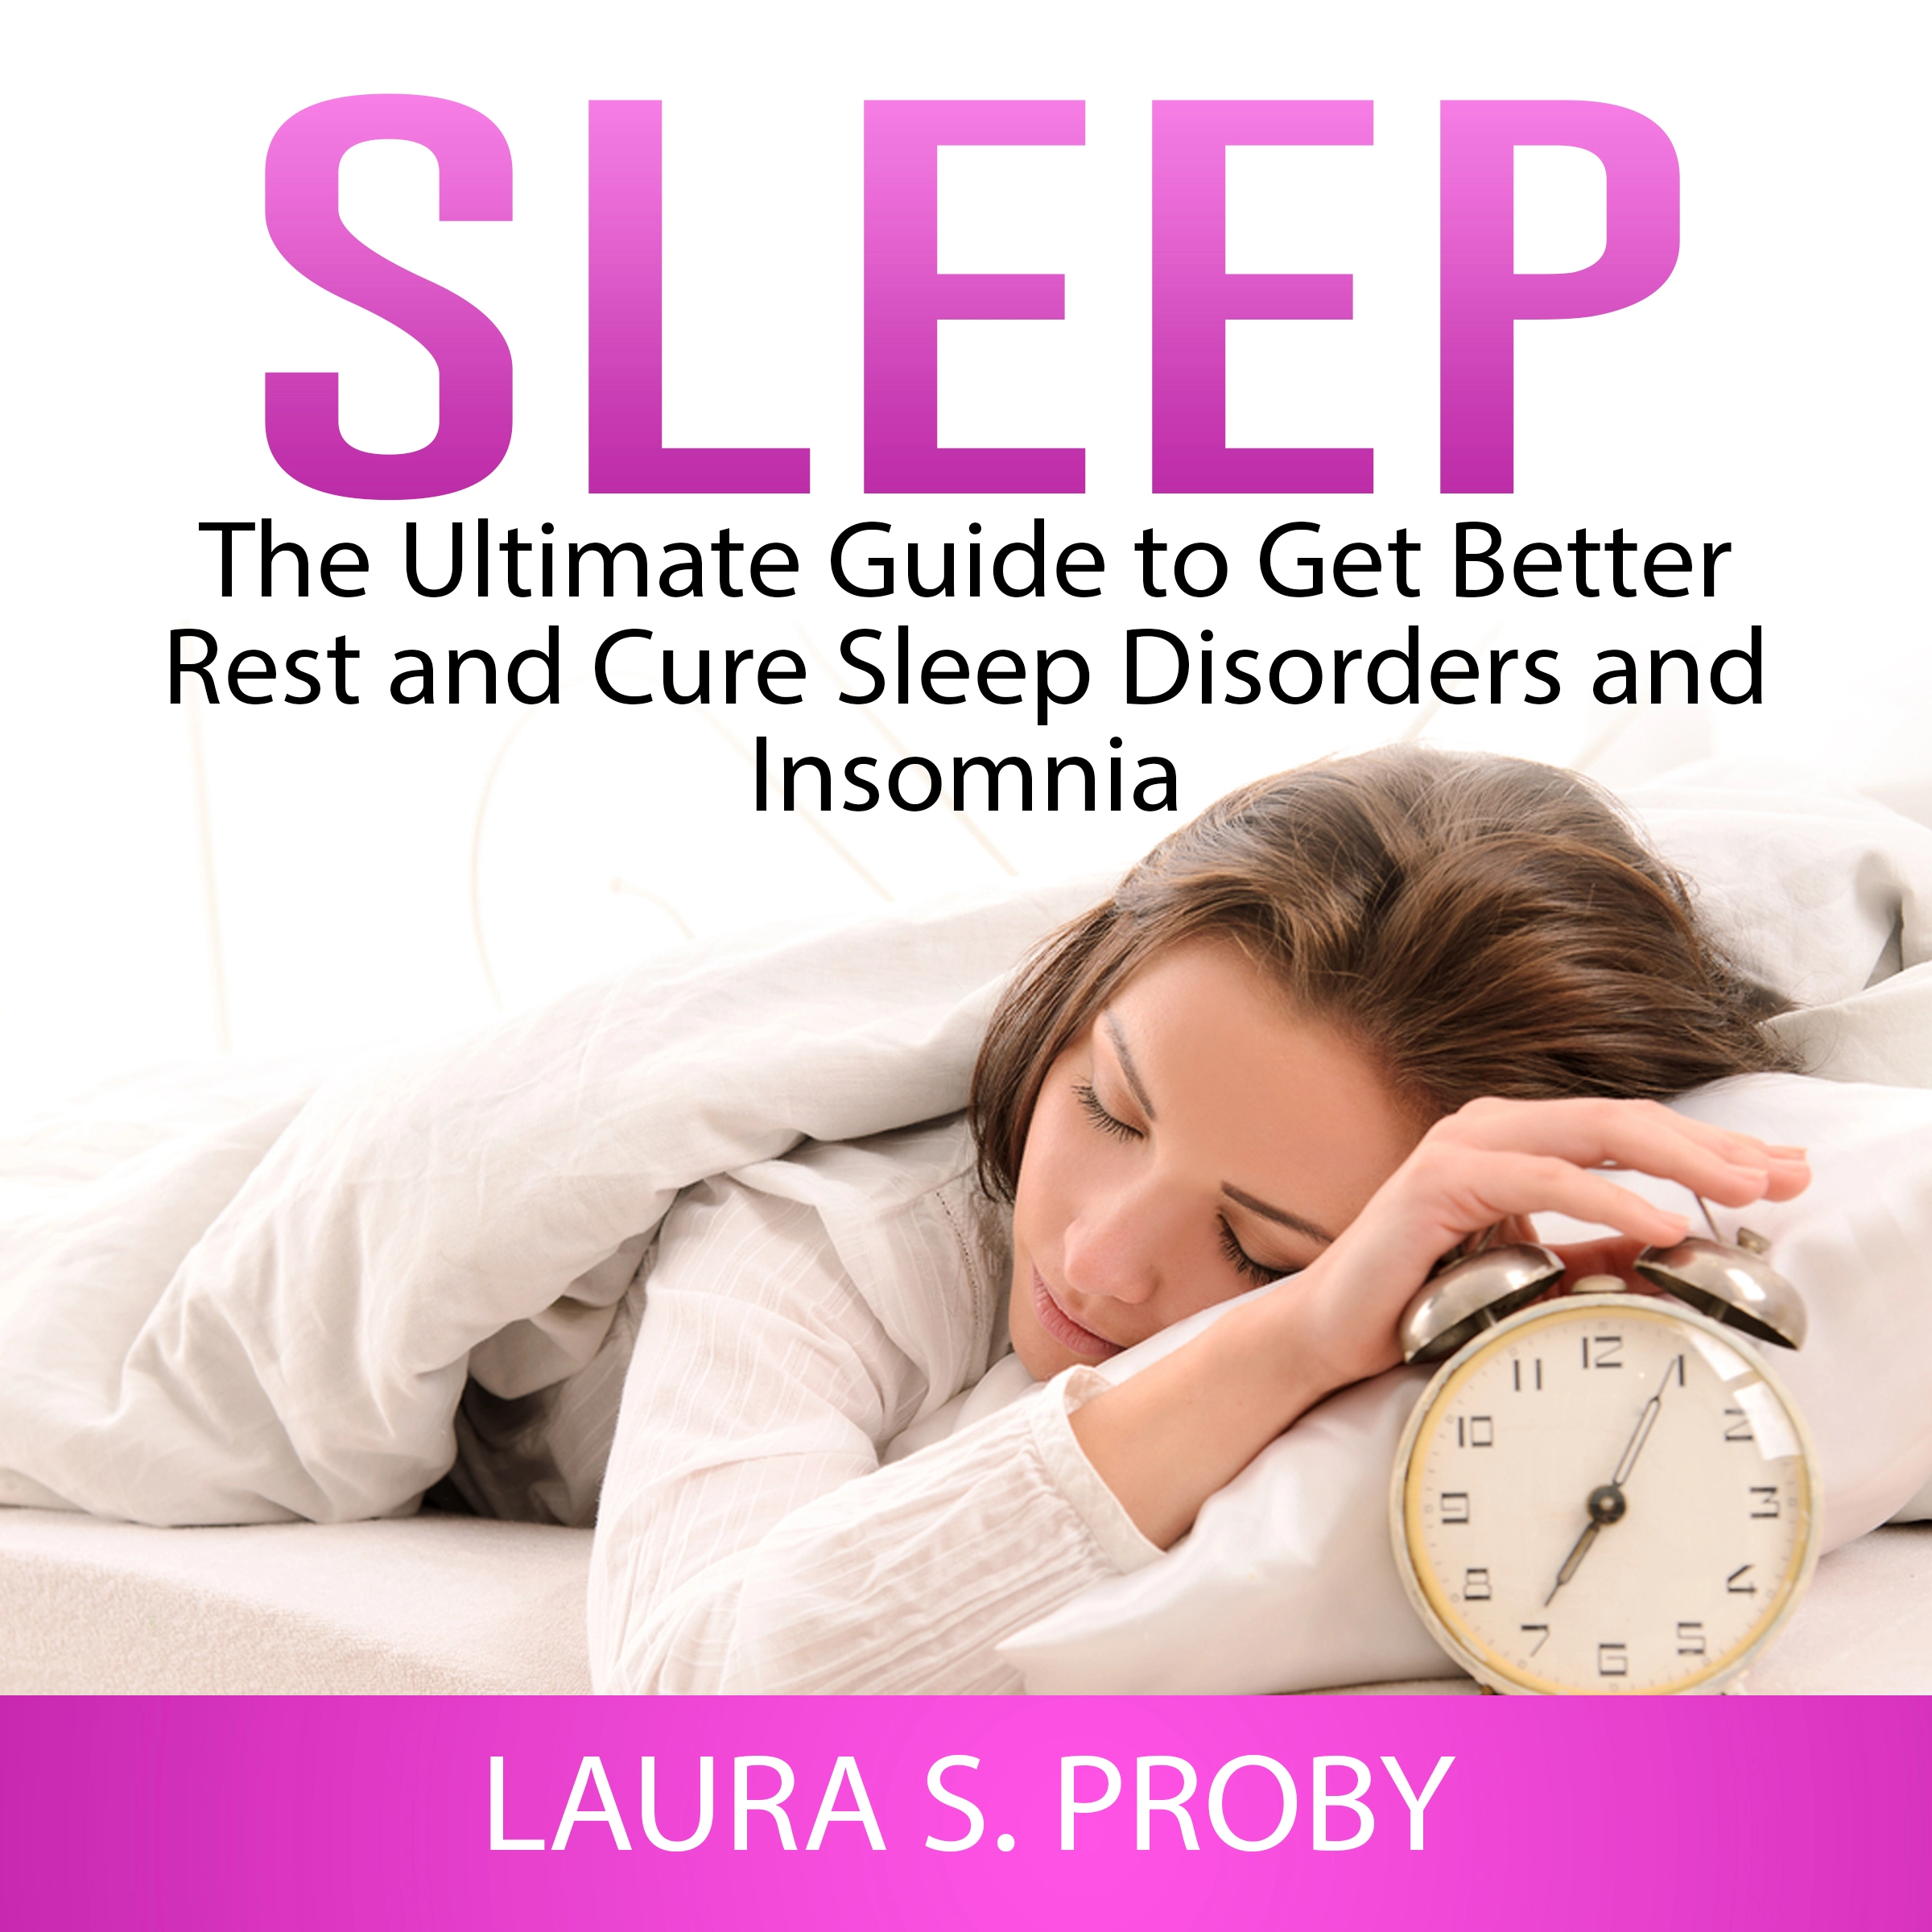 Sleep: The Ultimate Guide to Get Better Rest and Cure Sleep Disorders and Insomnia Audiobook by Laura S. Proby